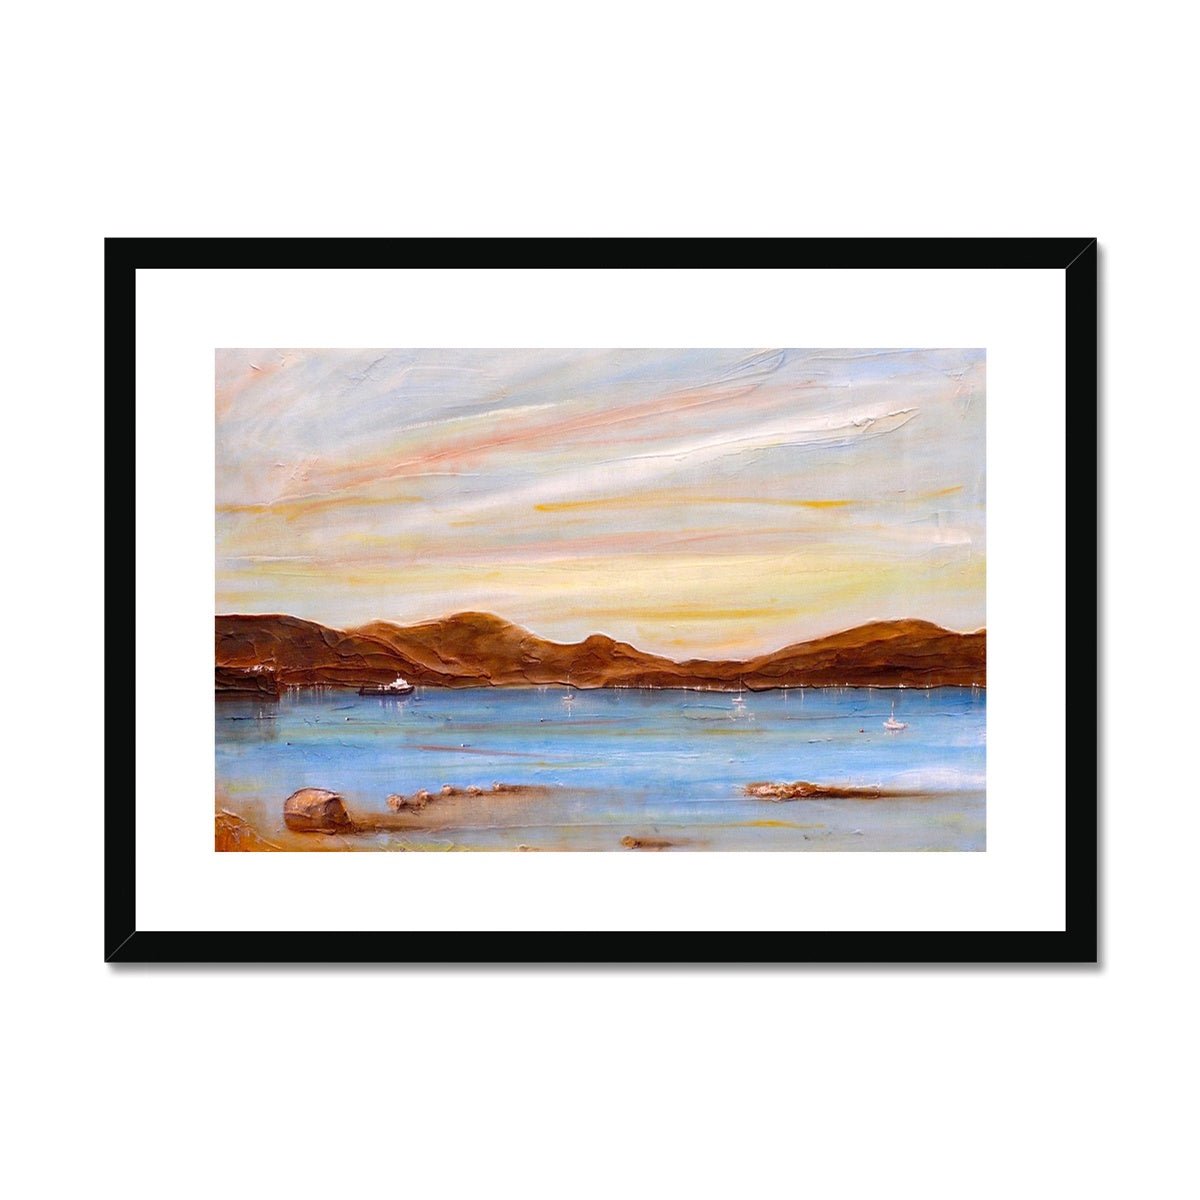 The Last Ferry To Dunoon Painting | Framed & Mounted Prints From Scotland-Framed & Mounted Prints-River Clyde Art Gallery-A2 Landscape-Black Frame-Paintings, Prints, Homeware, Art Gifts From Scotland By Scottish Artist Kevin Hunter